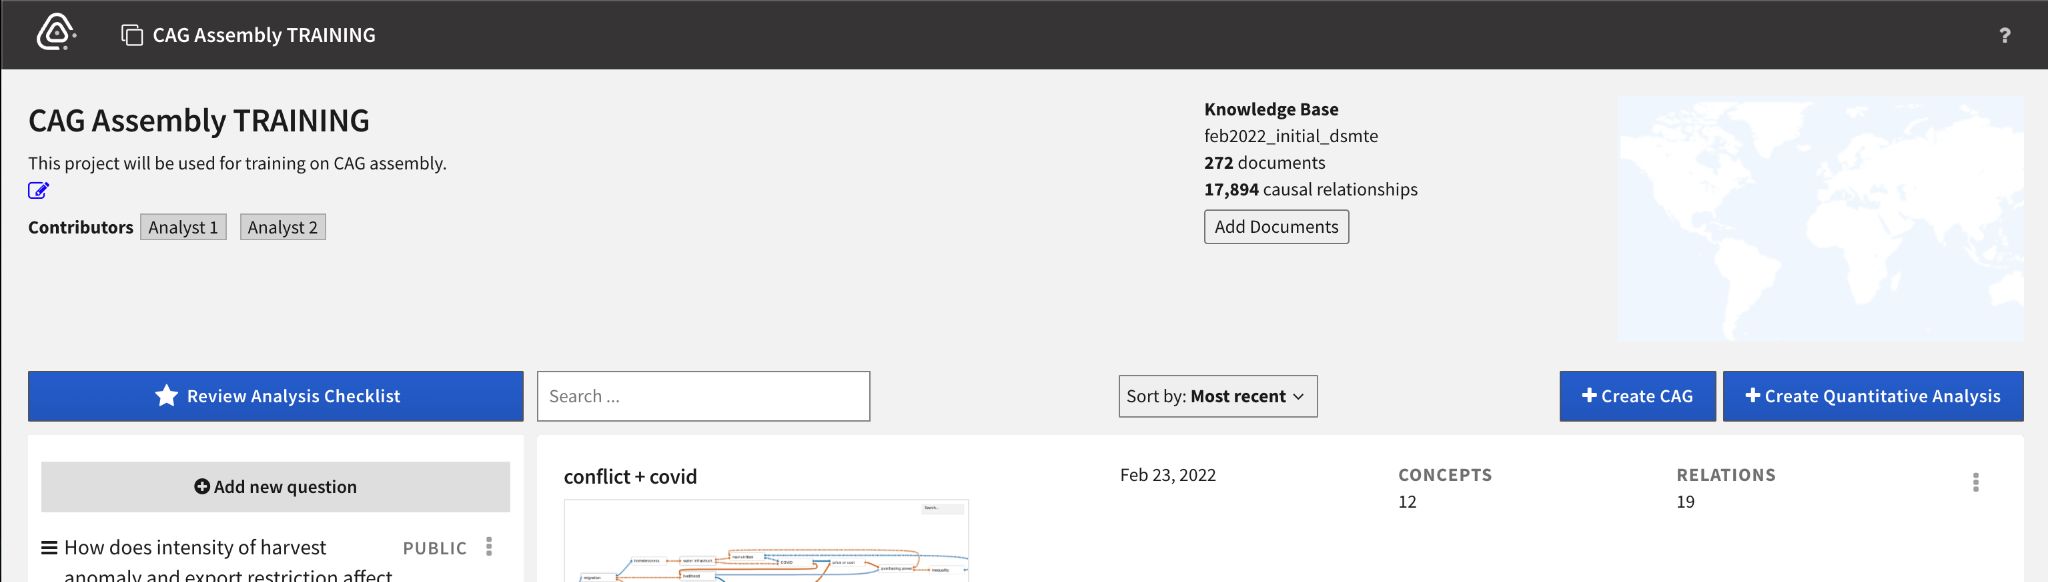 Knowledge Base metadata on the Project page